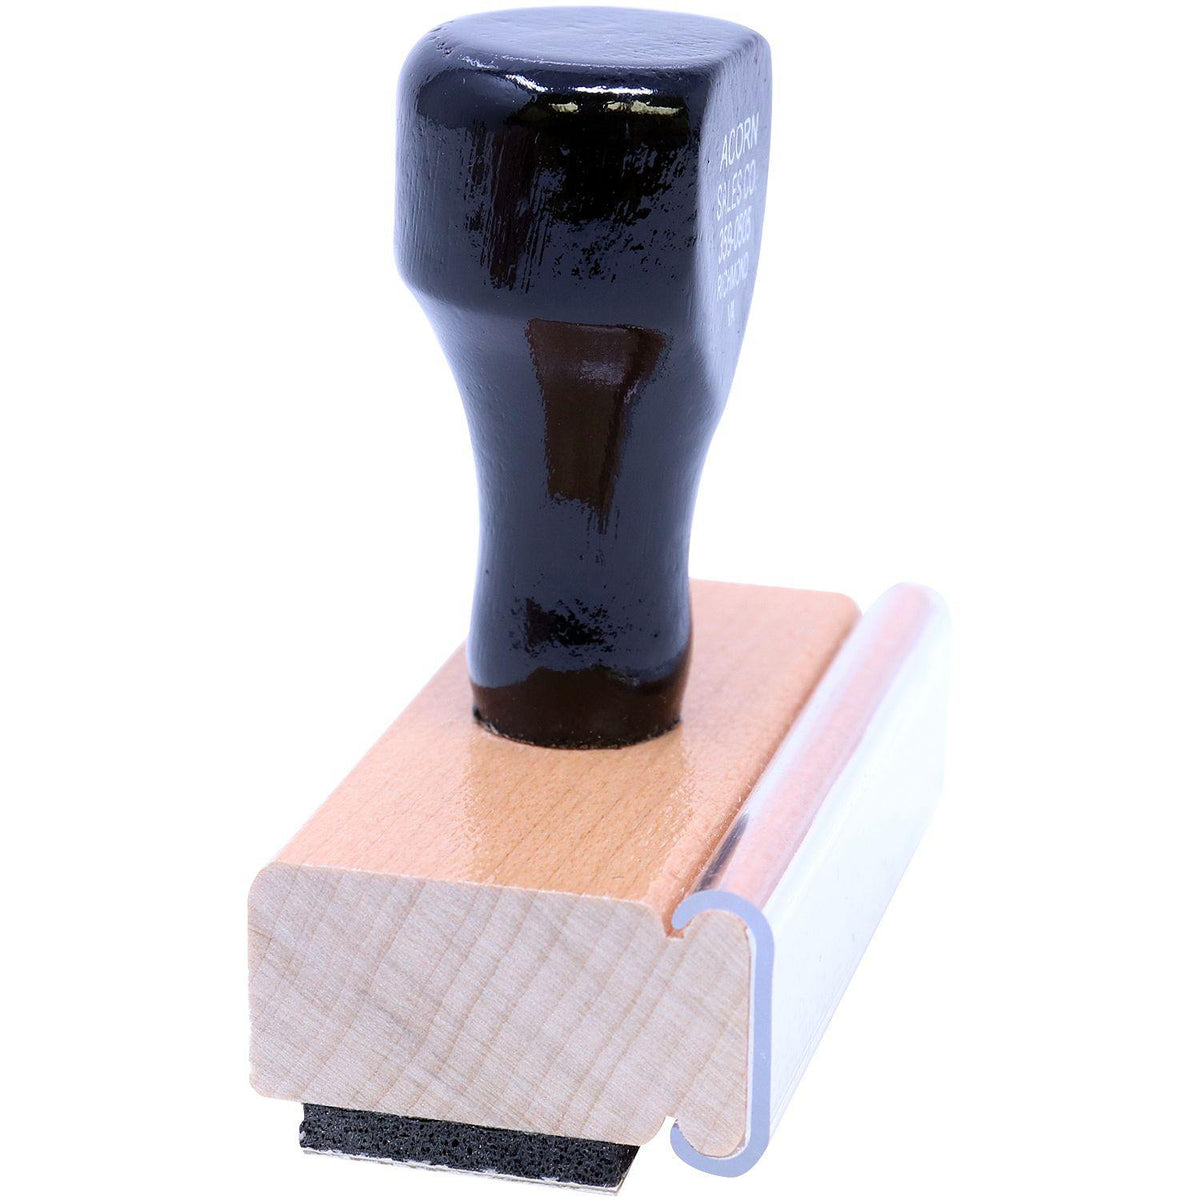 Side View of Large File with Envelope Rubber Stamp at an Angle